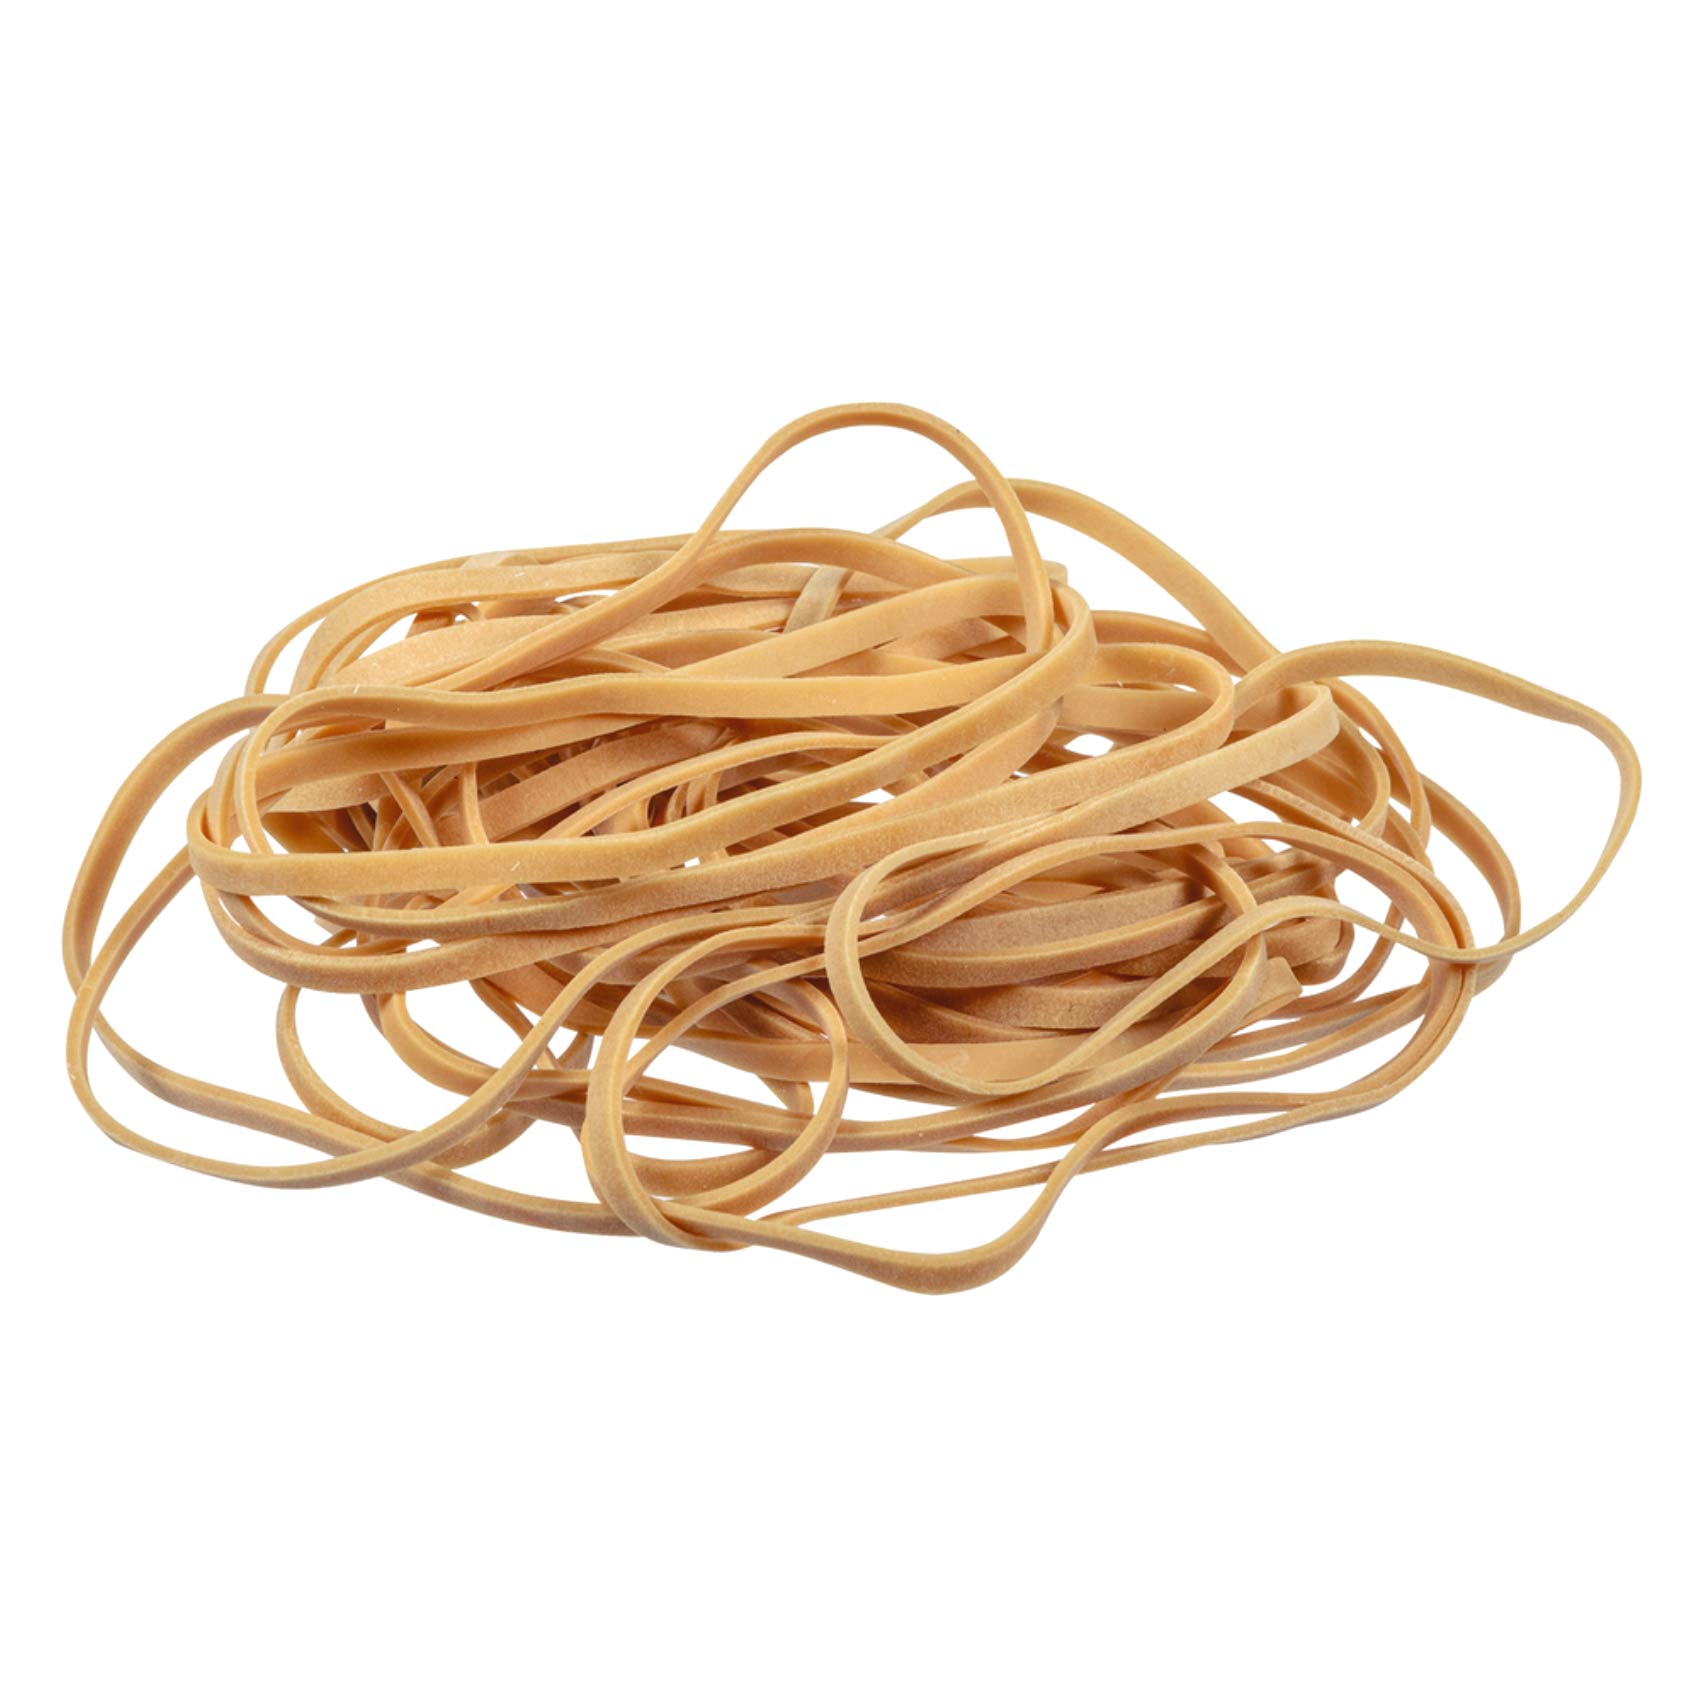 RUBBER BANDS 100 GSM NO.18 ASSORTED